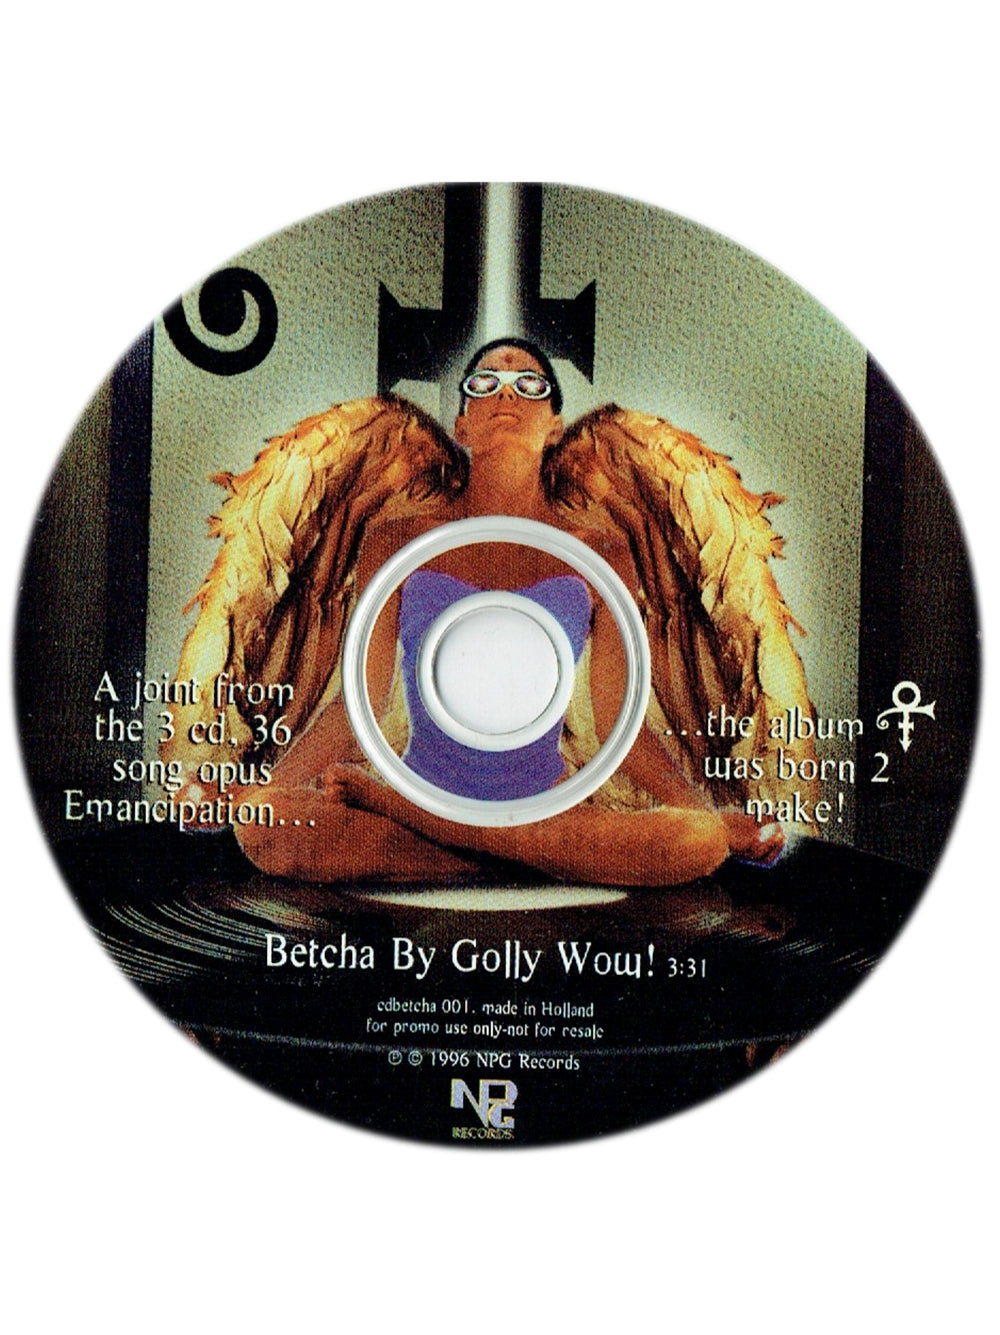 Prince – O(+> Betcha By Golly Wow! Promotional Only CD Single 1 Track EU Release 1996 Prince*